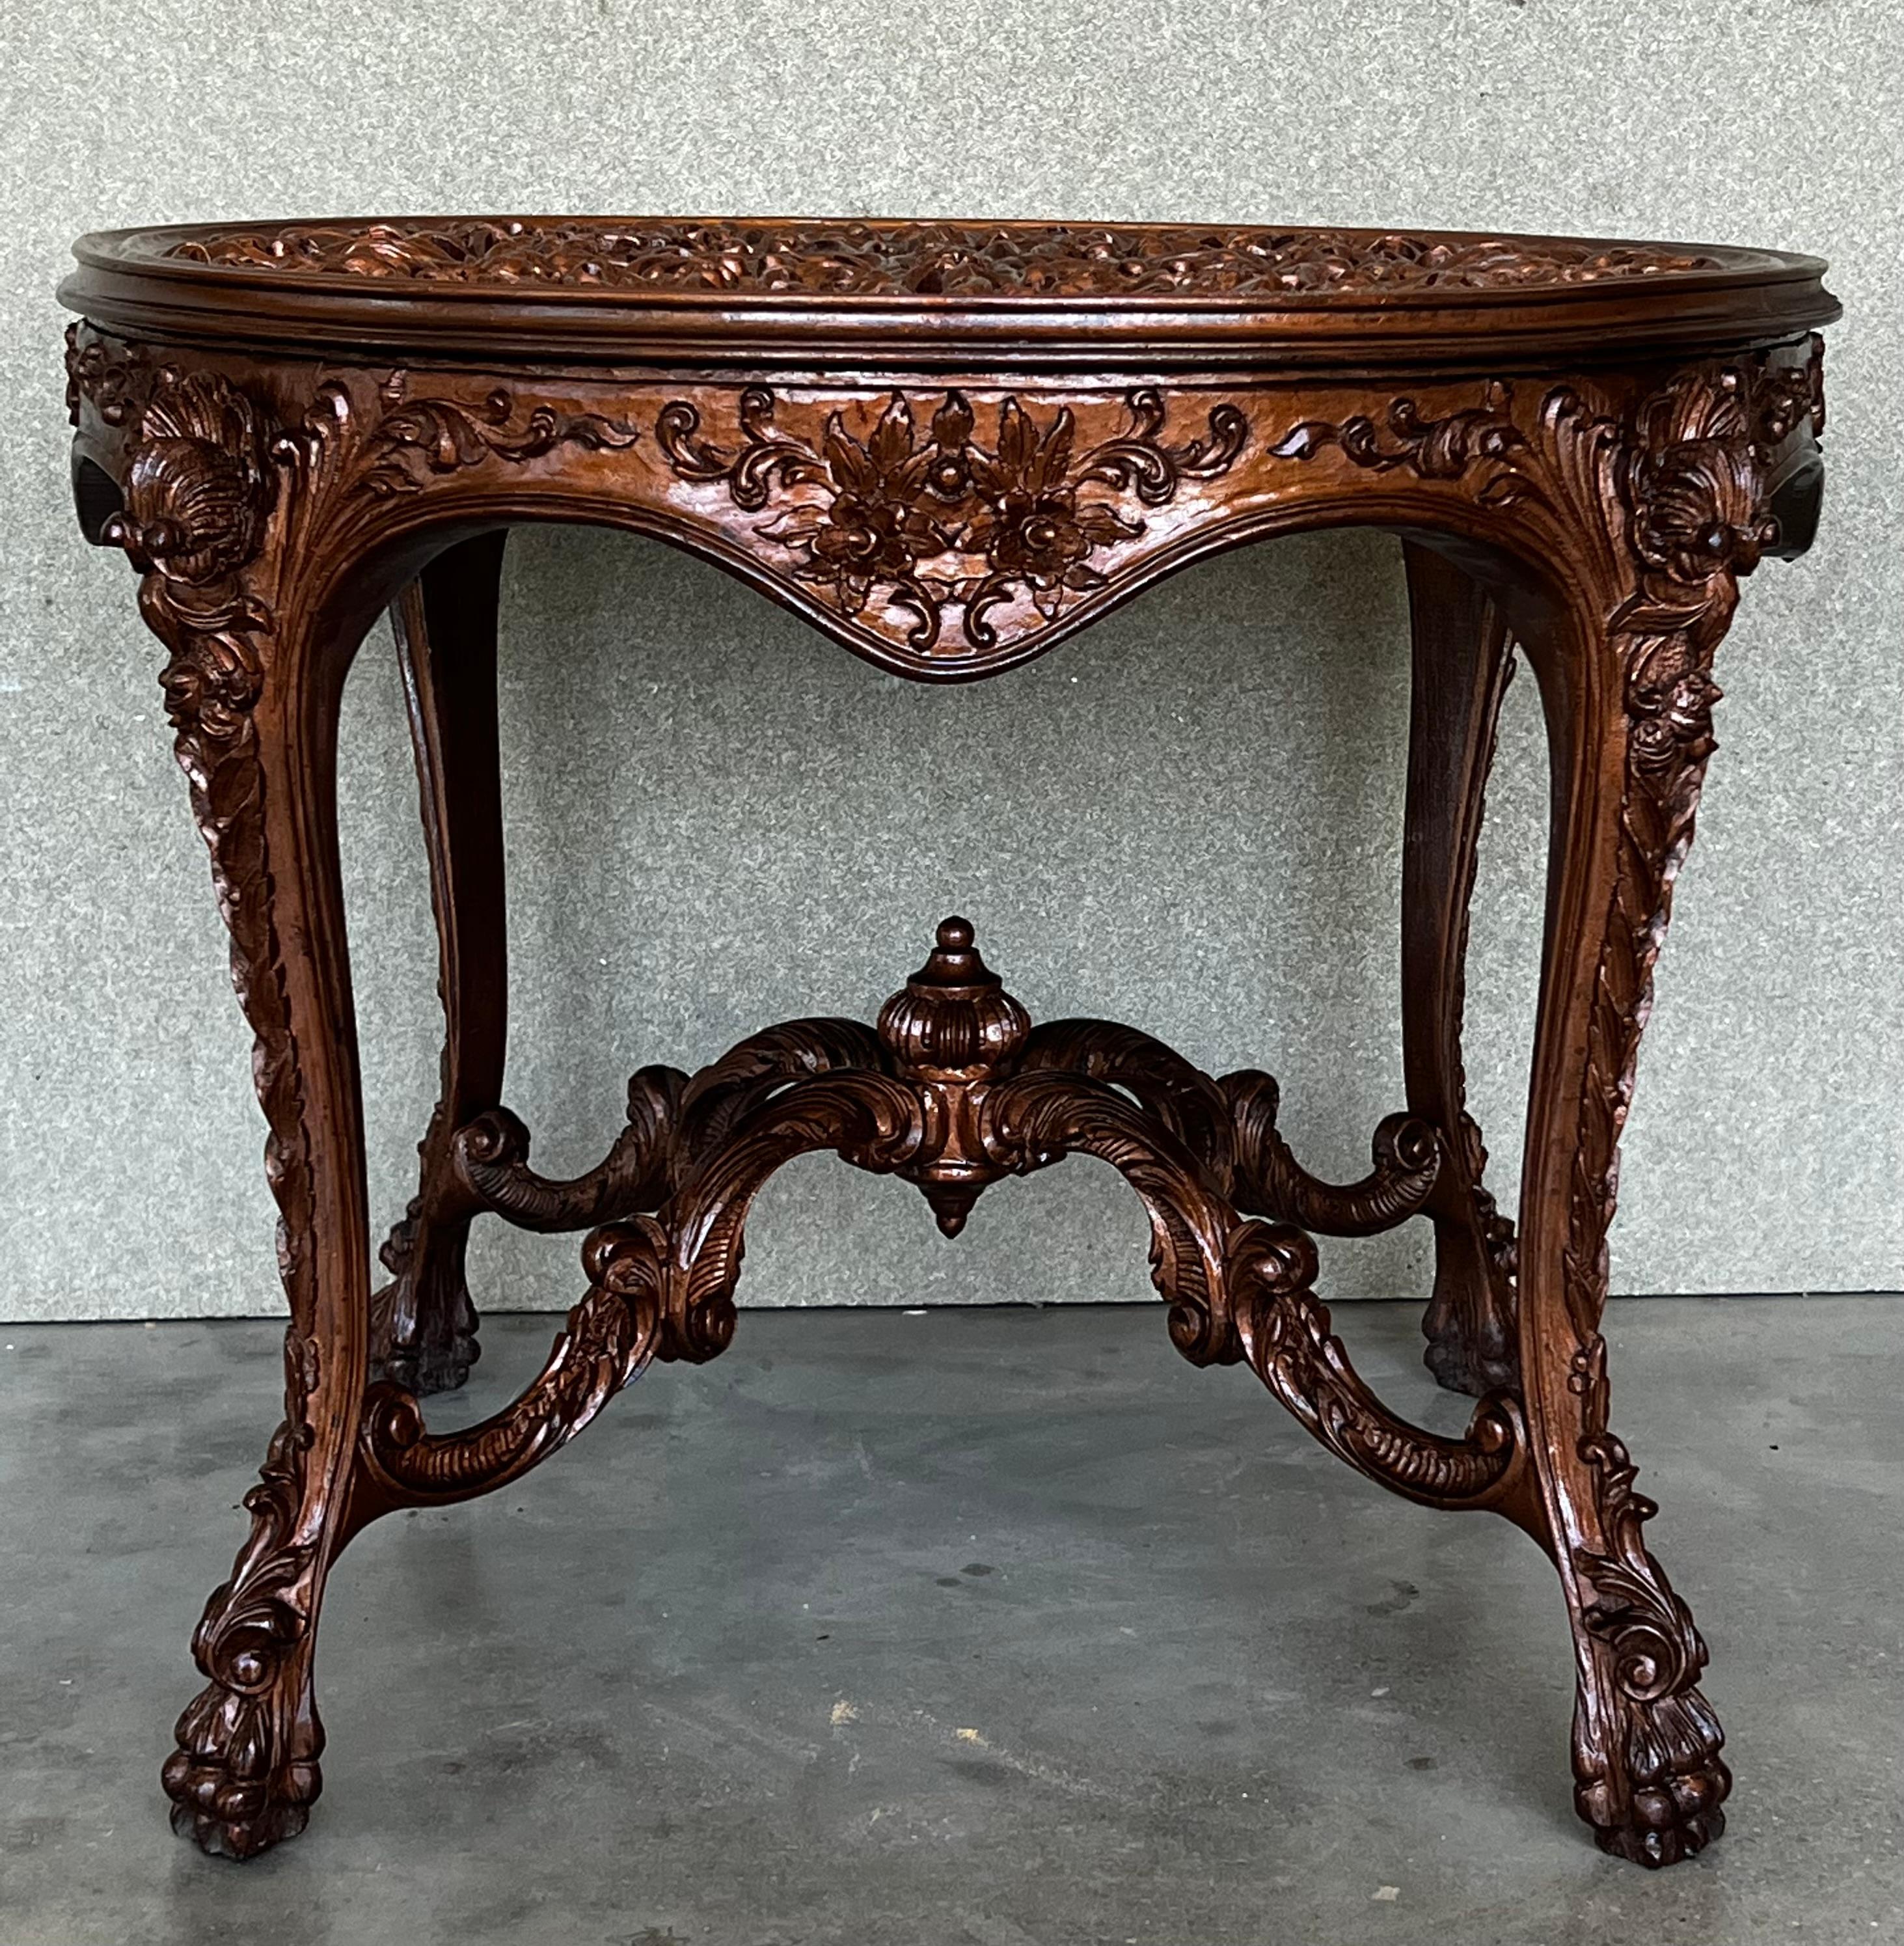 An Italian Rococo style round side table with a richly carved top and base from the 20th century. The apron is adorned on all sides with typical Mariano Garcia motifs . The table is on four cabriole legs with scrolled feet, adorned with acanthus